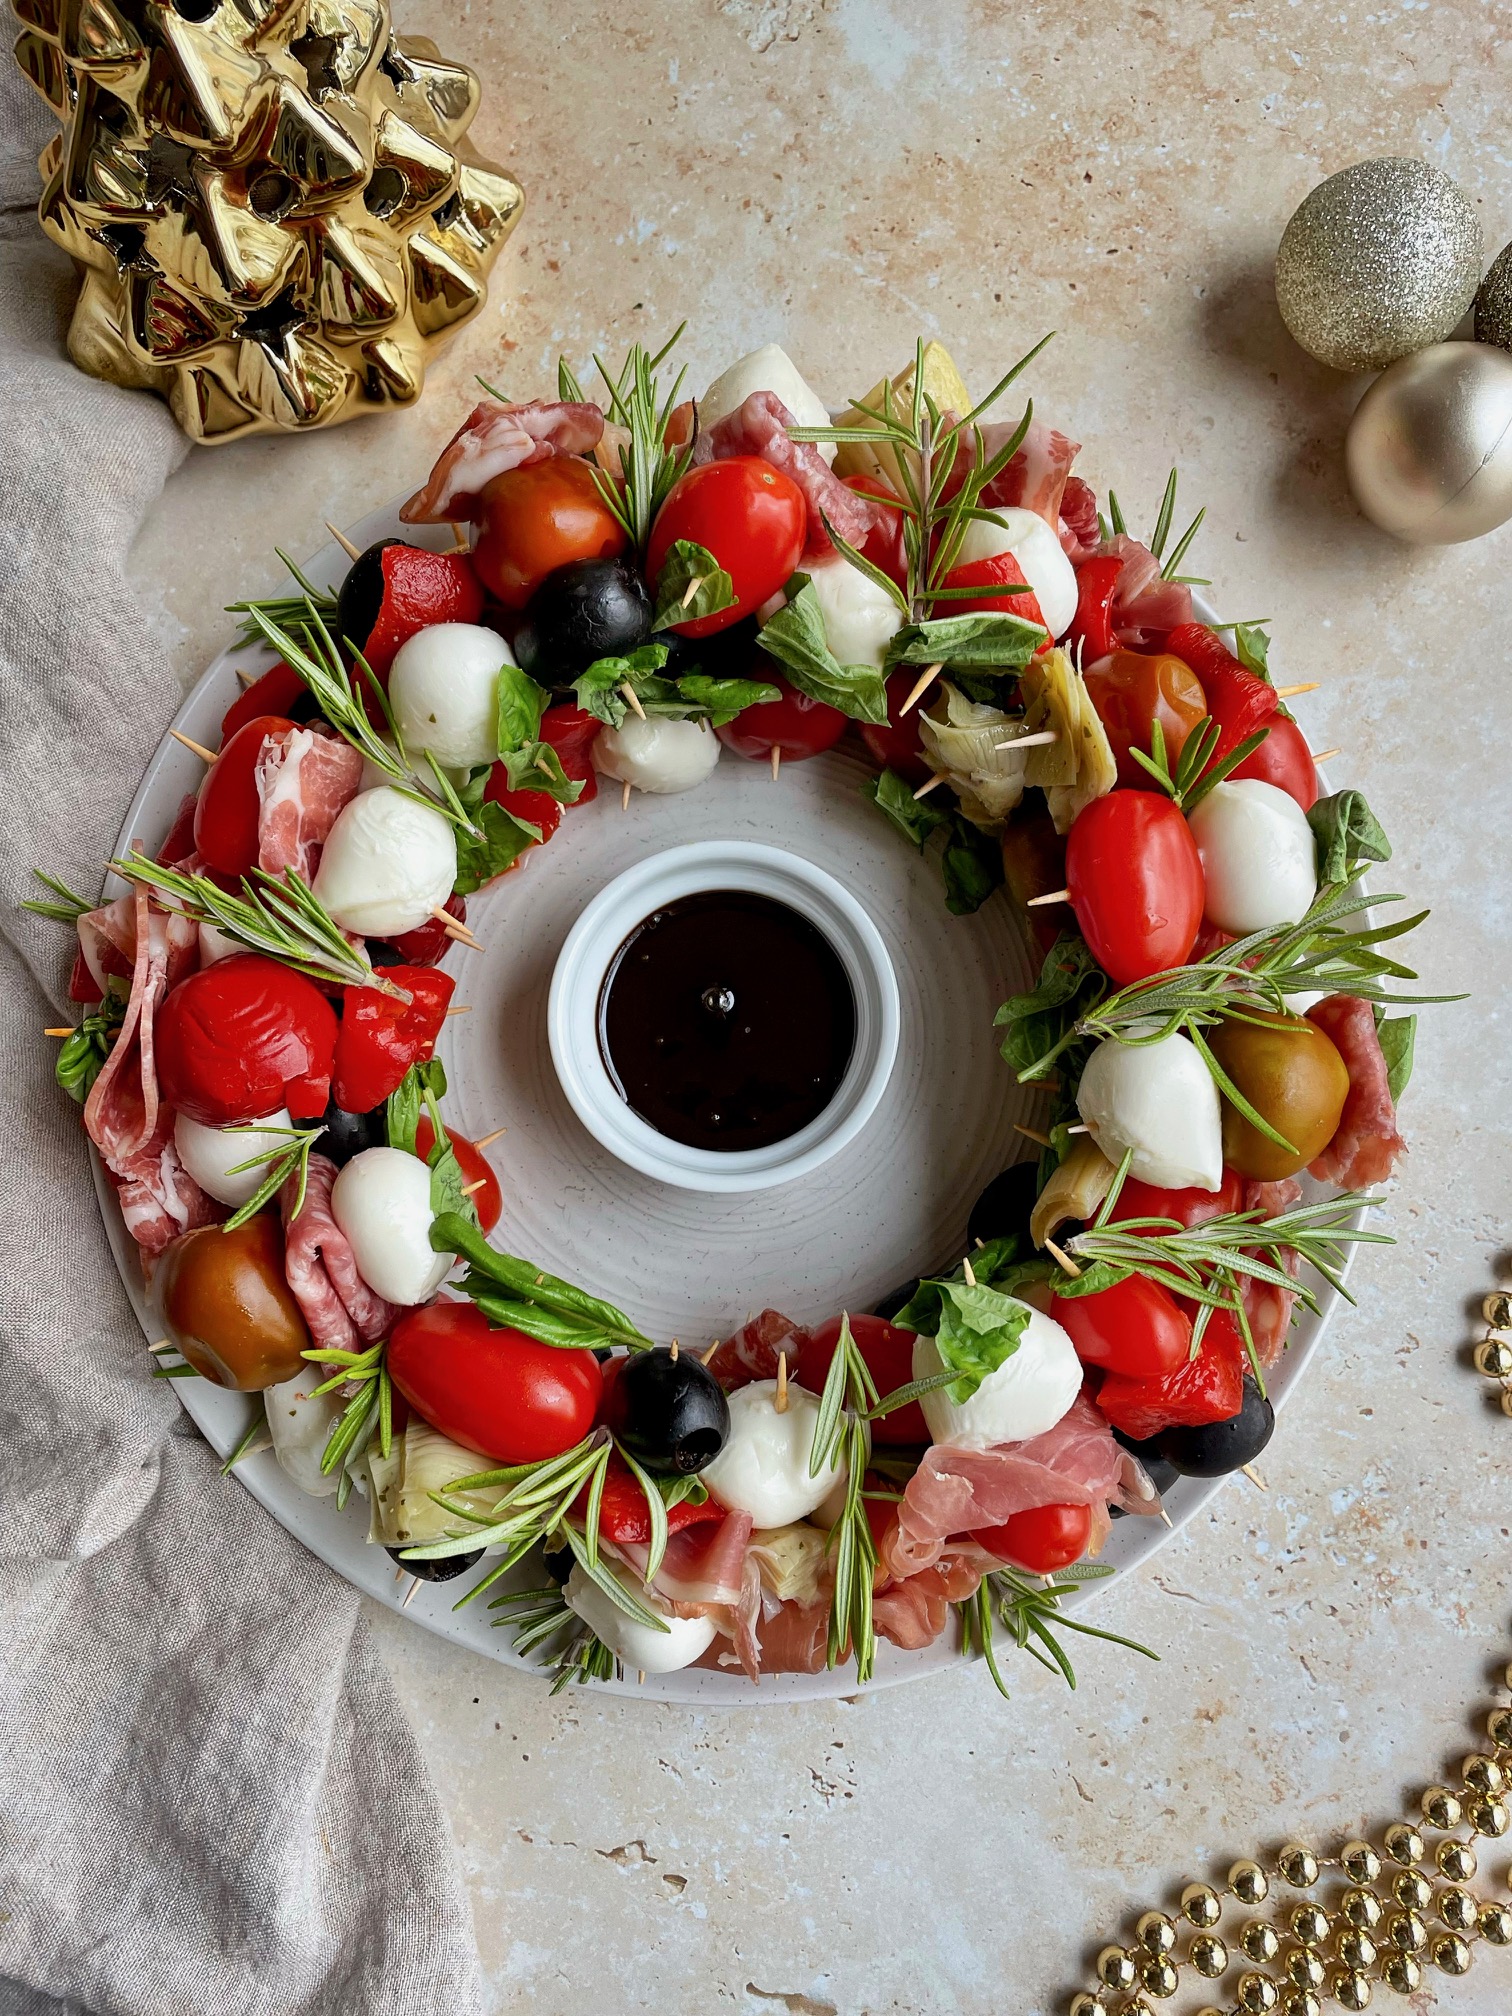 Antipasto wreath with balsamic glaze for dipping.